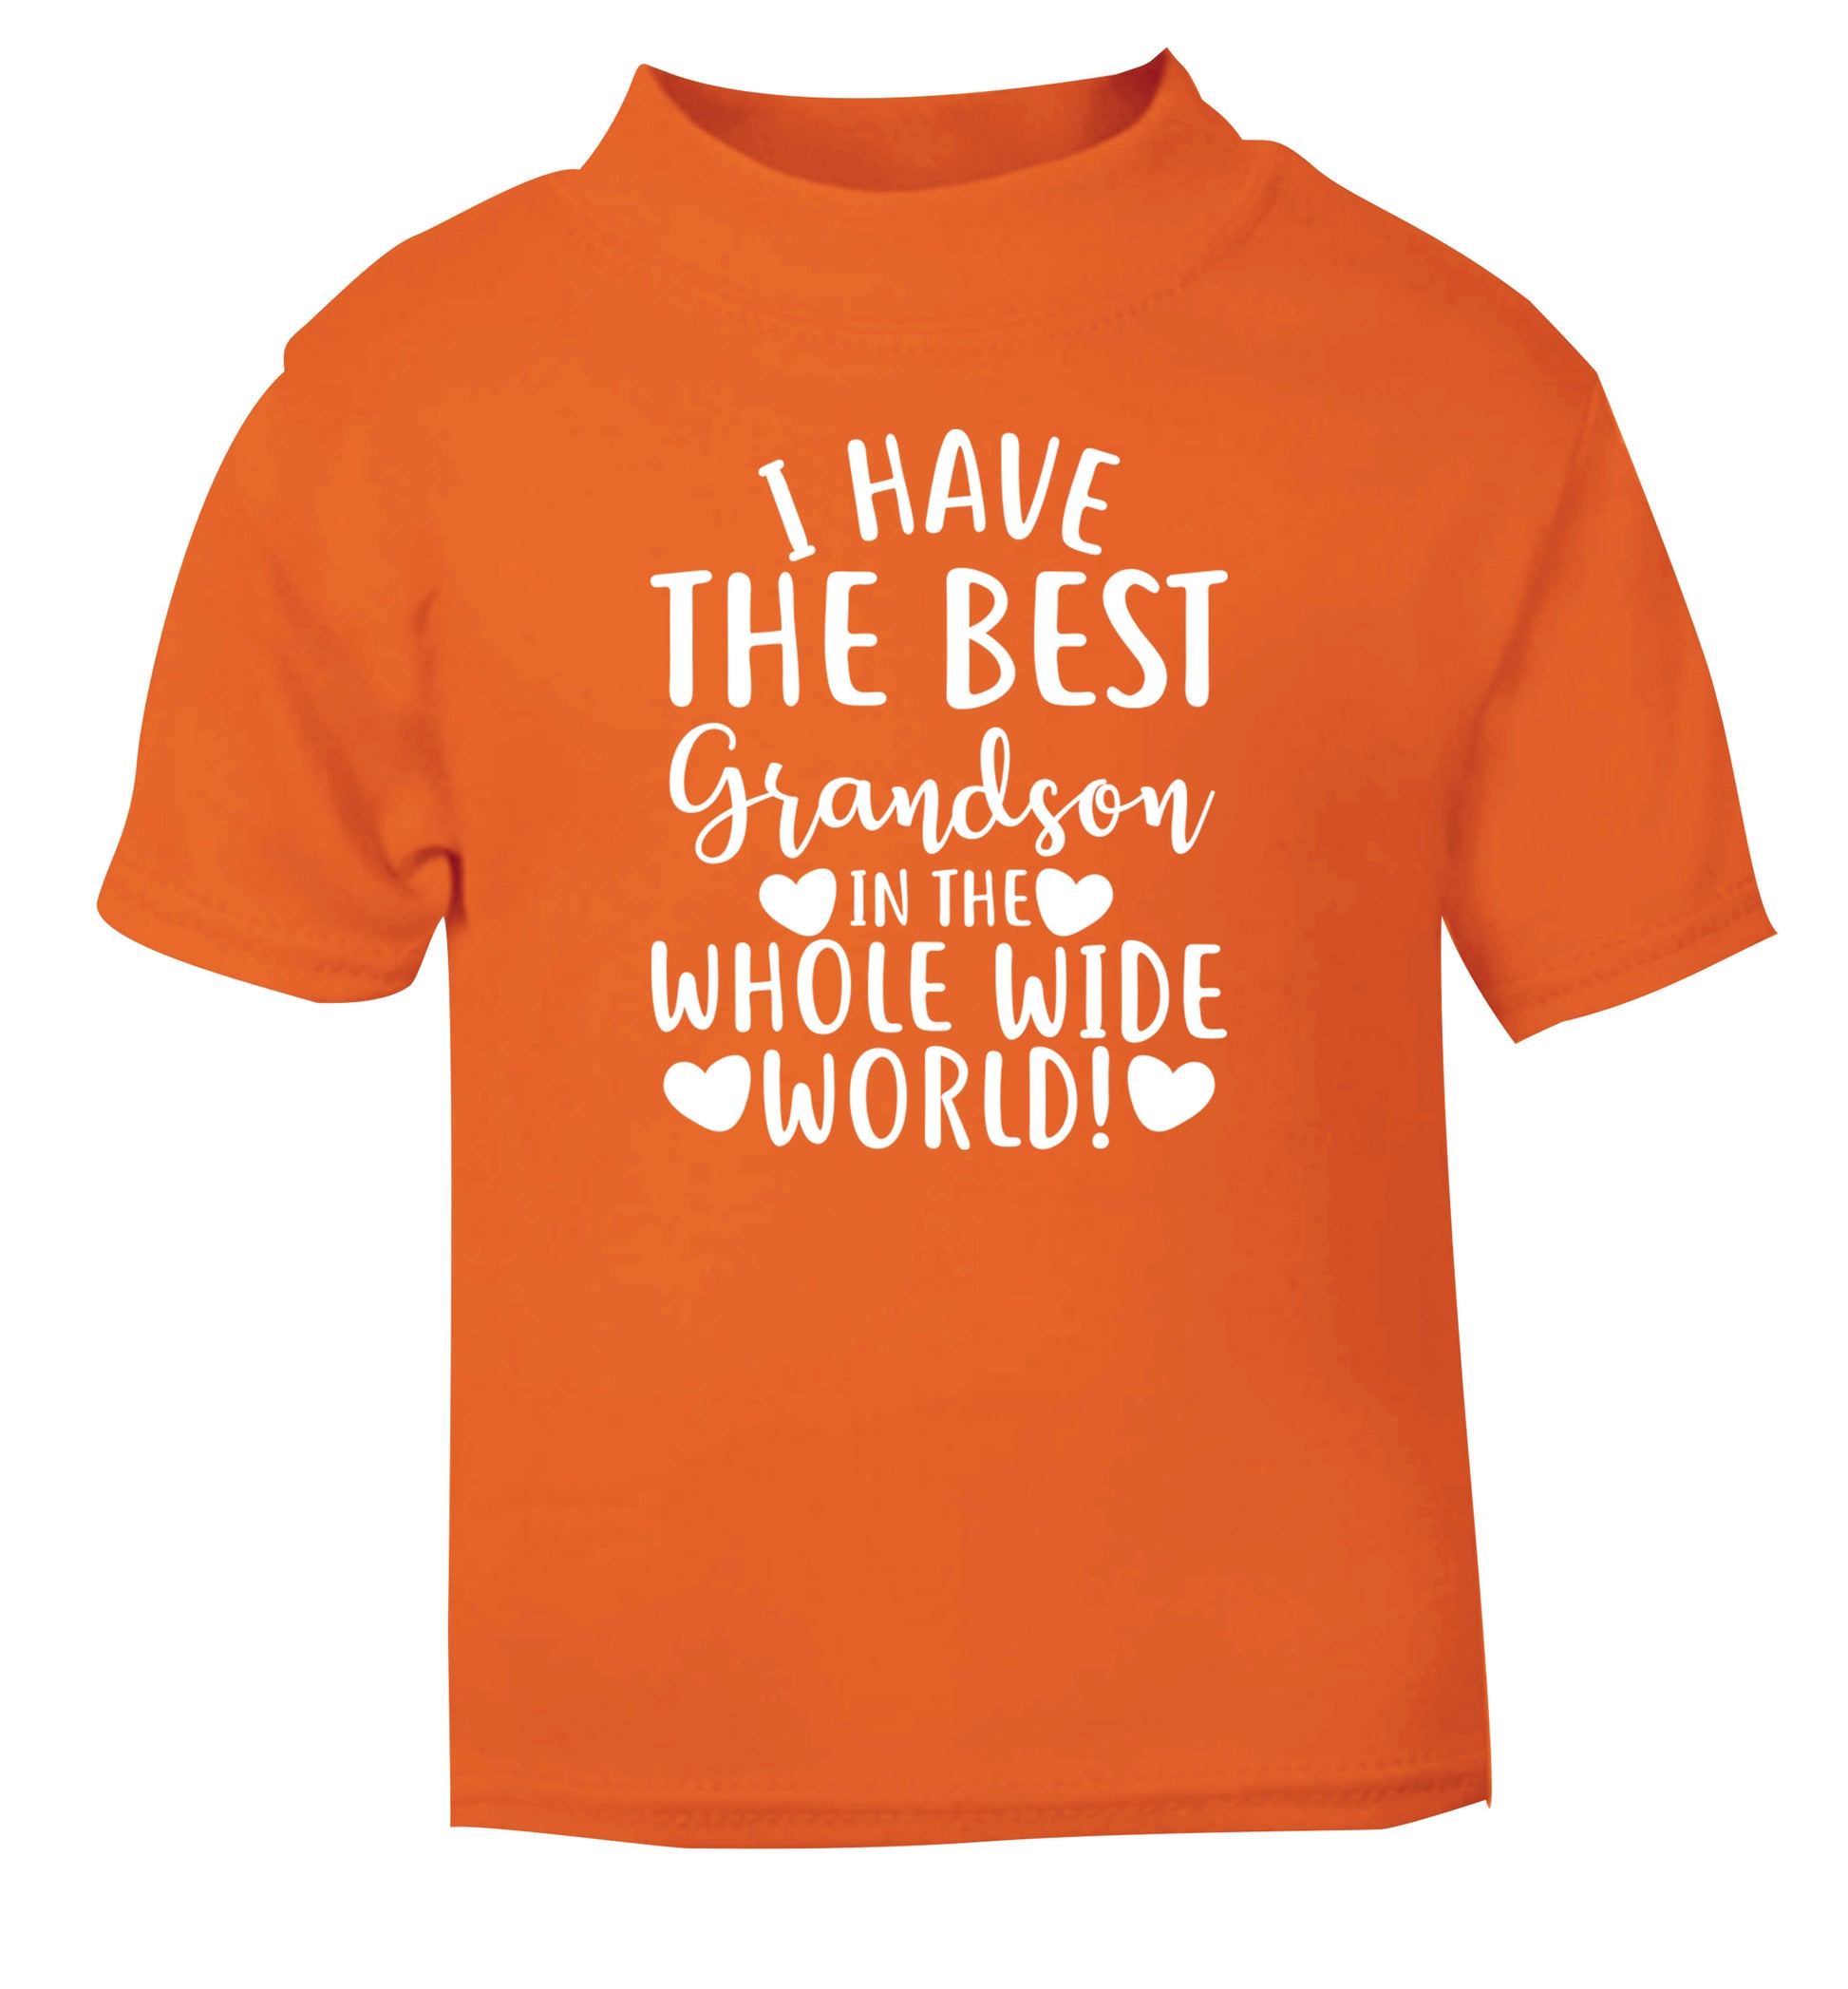 I have the best grandson in the whole wide world! orange Baby Toddler Tshirt 2 Years